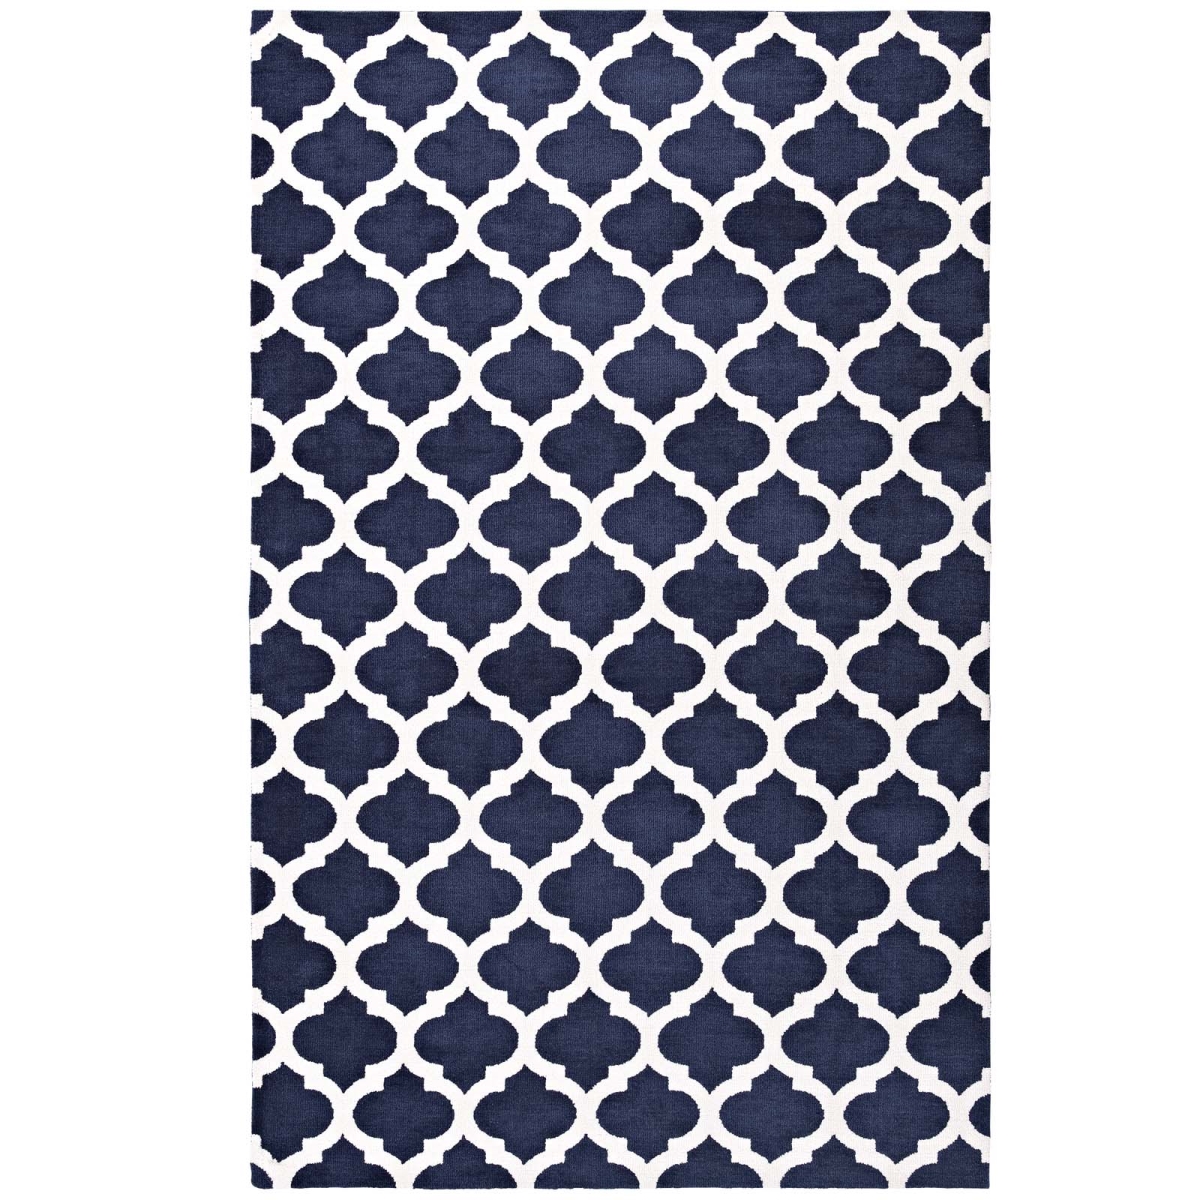 R-1001a-58 5 X 8 Ft. Lida Moroccan Trellis Polyester Area Rug - Navy & Ivory, 0.5 X 60 X 96 In.